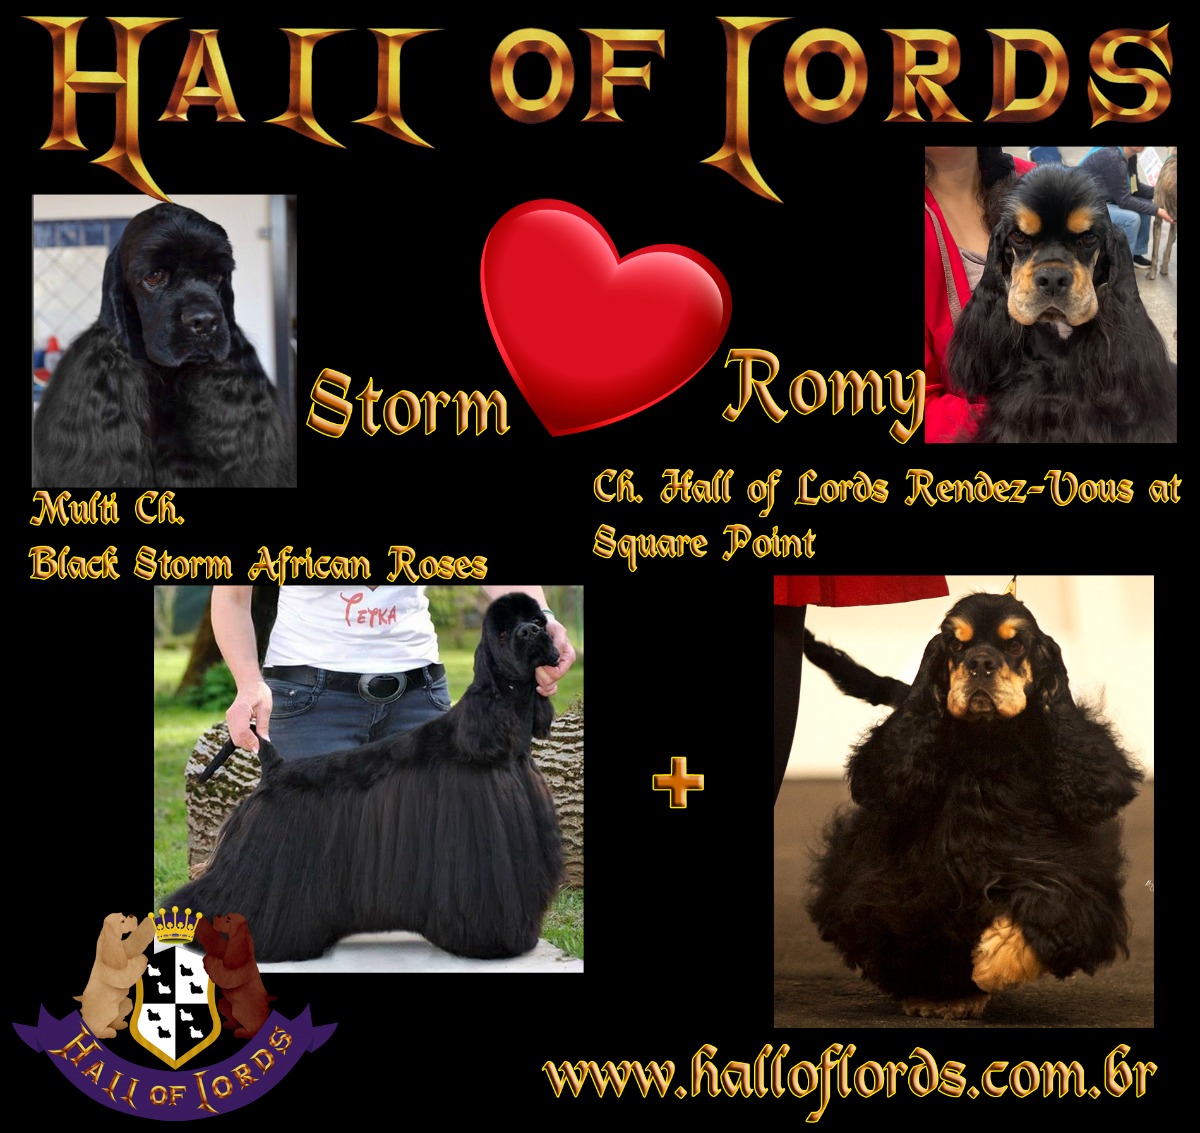 Beautiful AKC registered American Cocker Spaniel males. - Hall of Lords